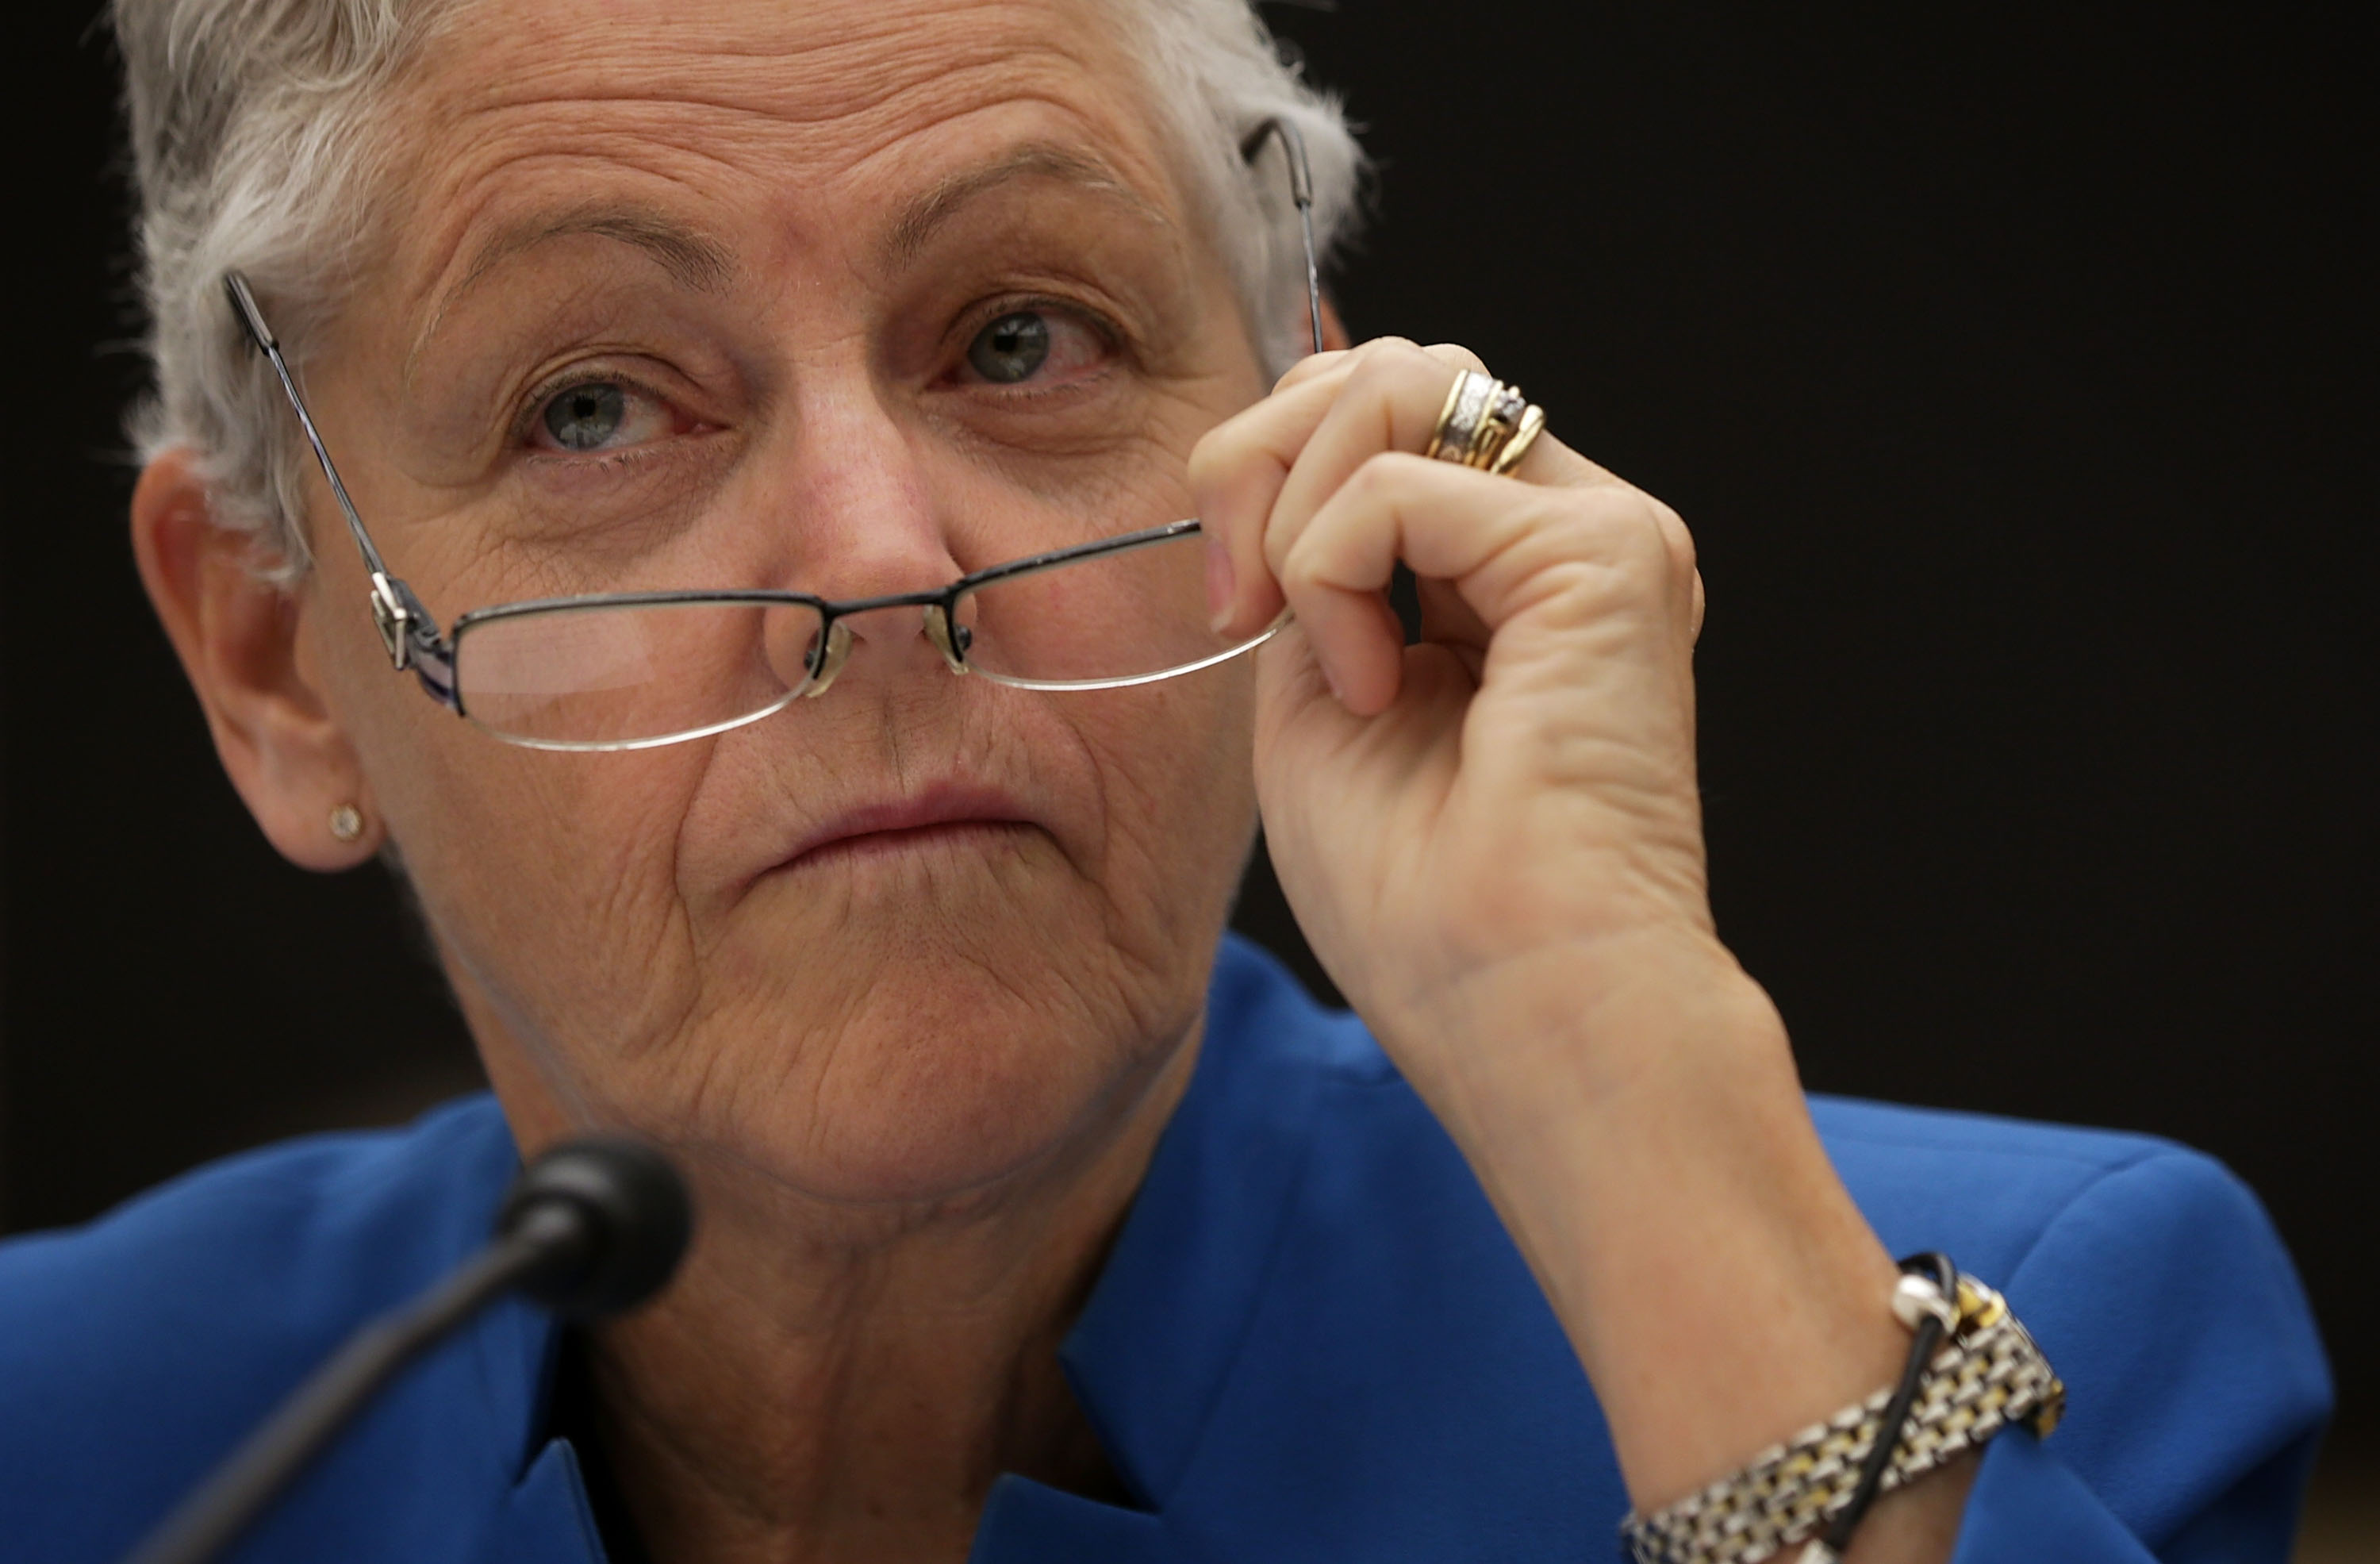 Administrator of the U.S. Environmental Protection Agency Gina McCarthy at a hearing before the House Science, Space, and Technology Committee in Washington on Jul. 9, 2015. (Alex Wong—Getty Images)